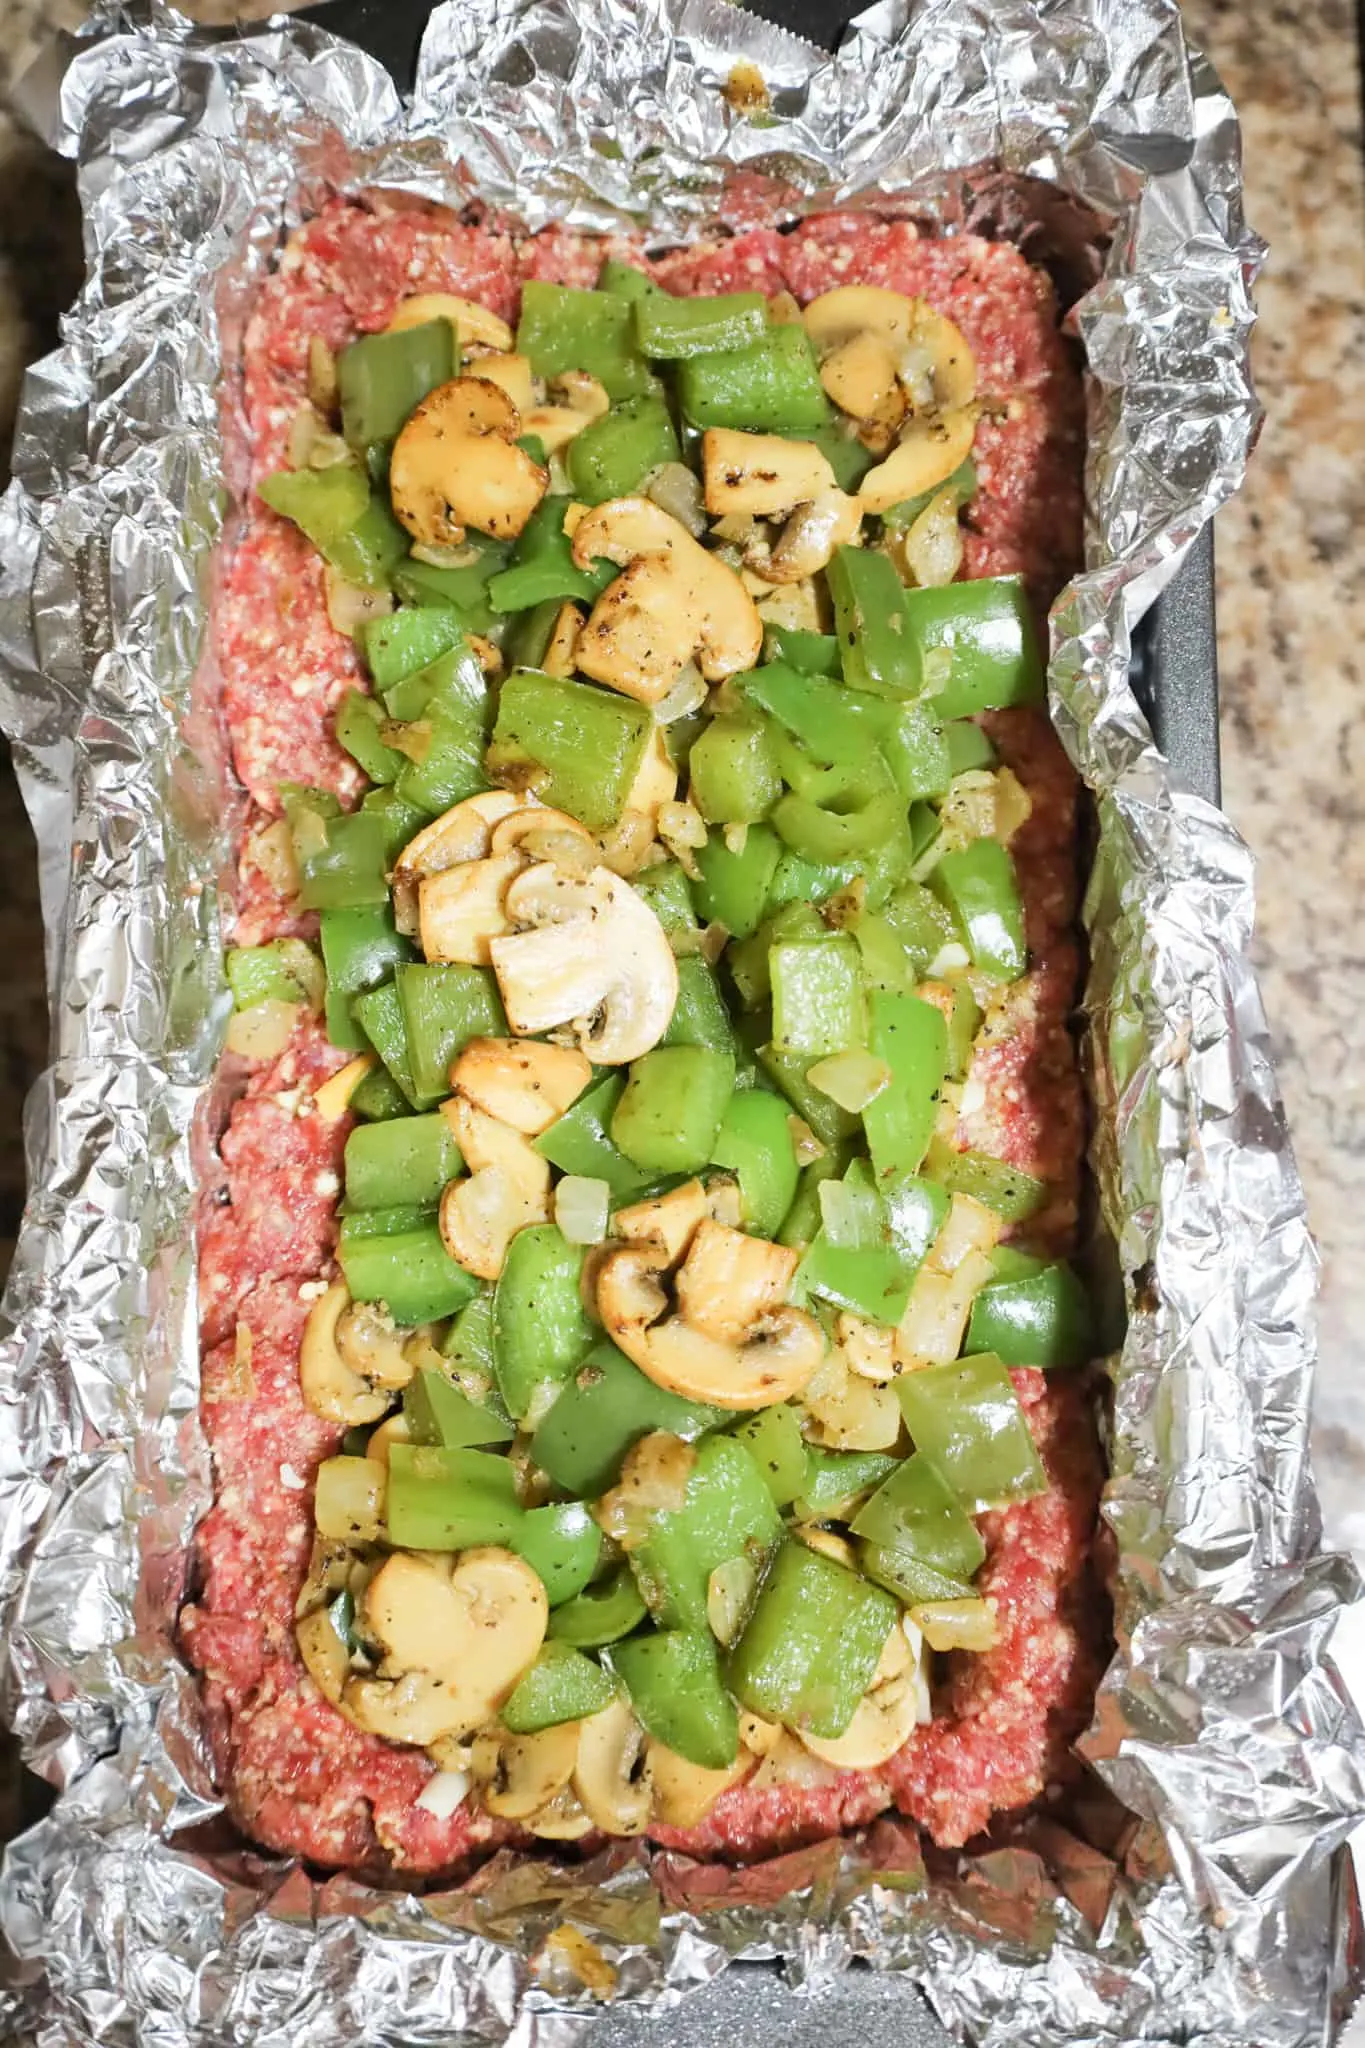 diced green peppers and sliced mushrooms on top of ground beef mixture in a loaf pan